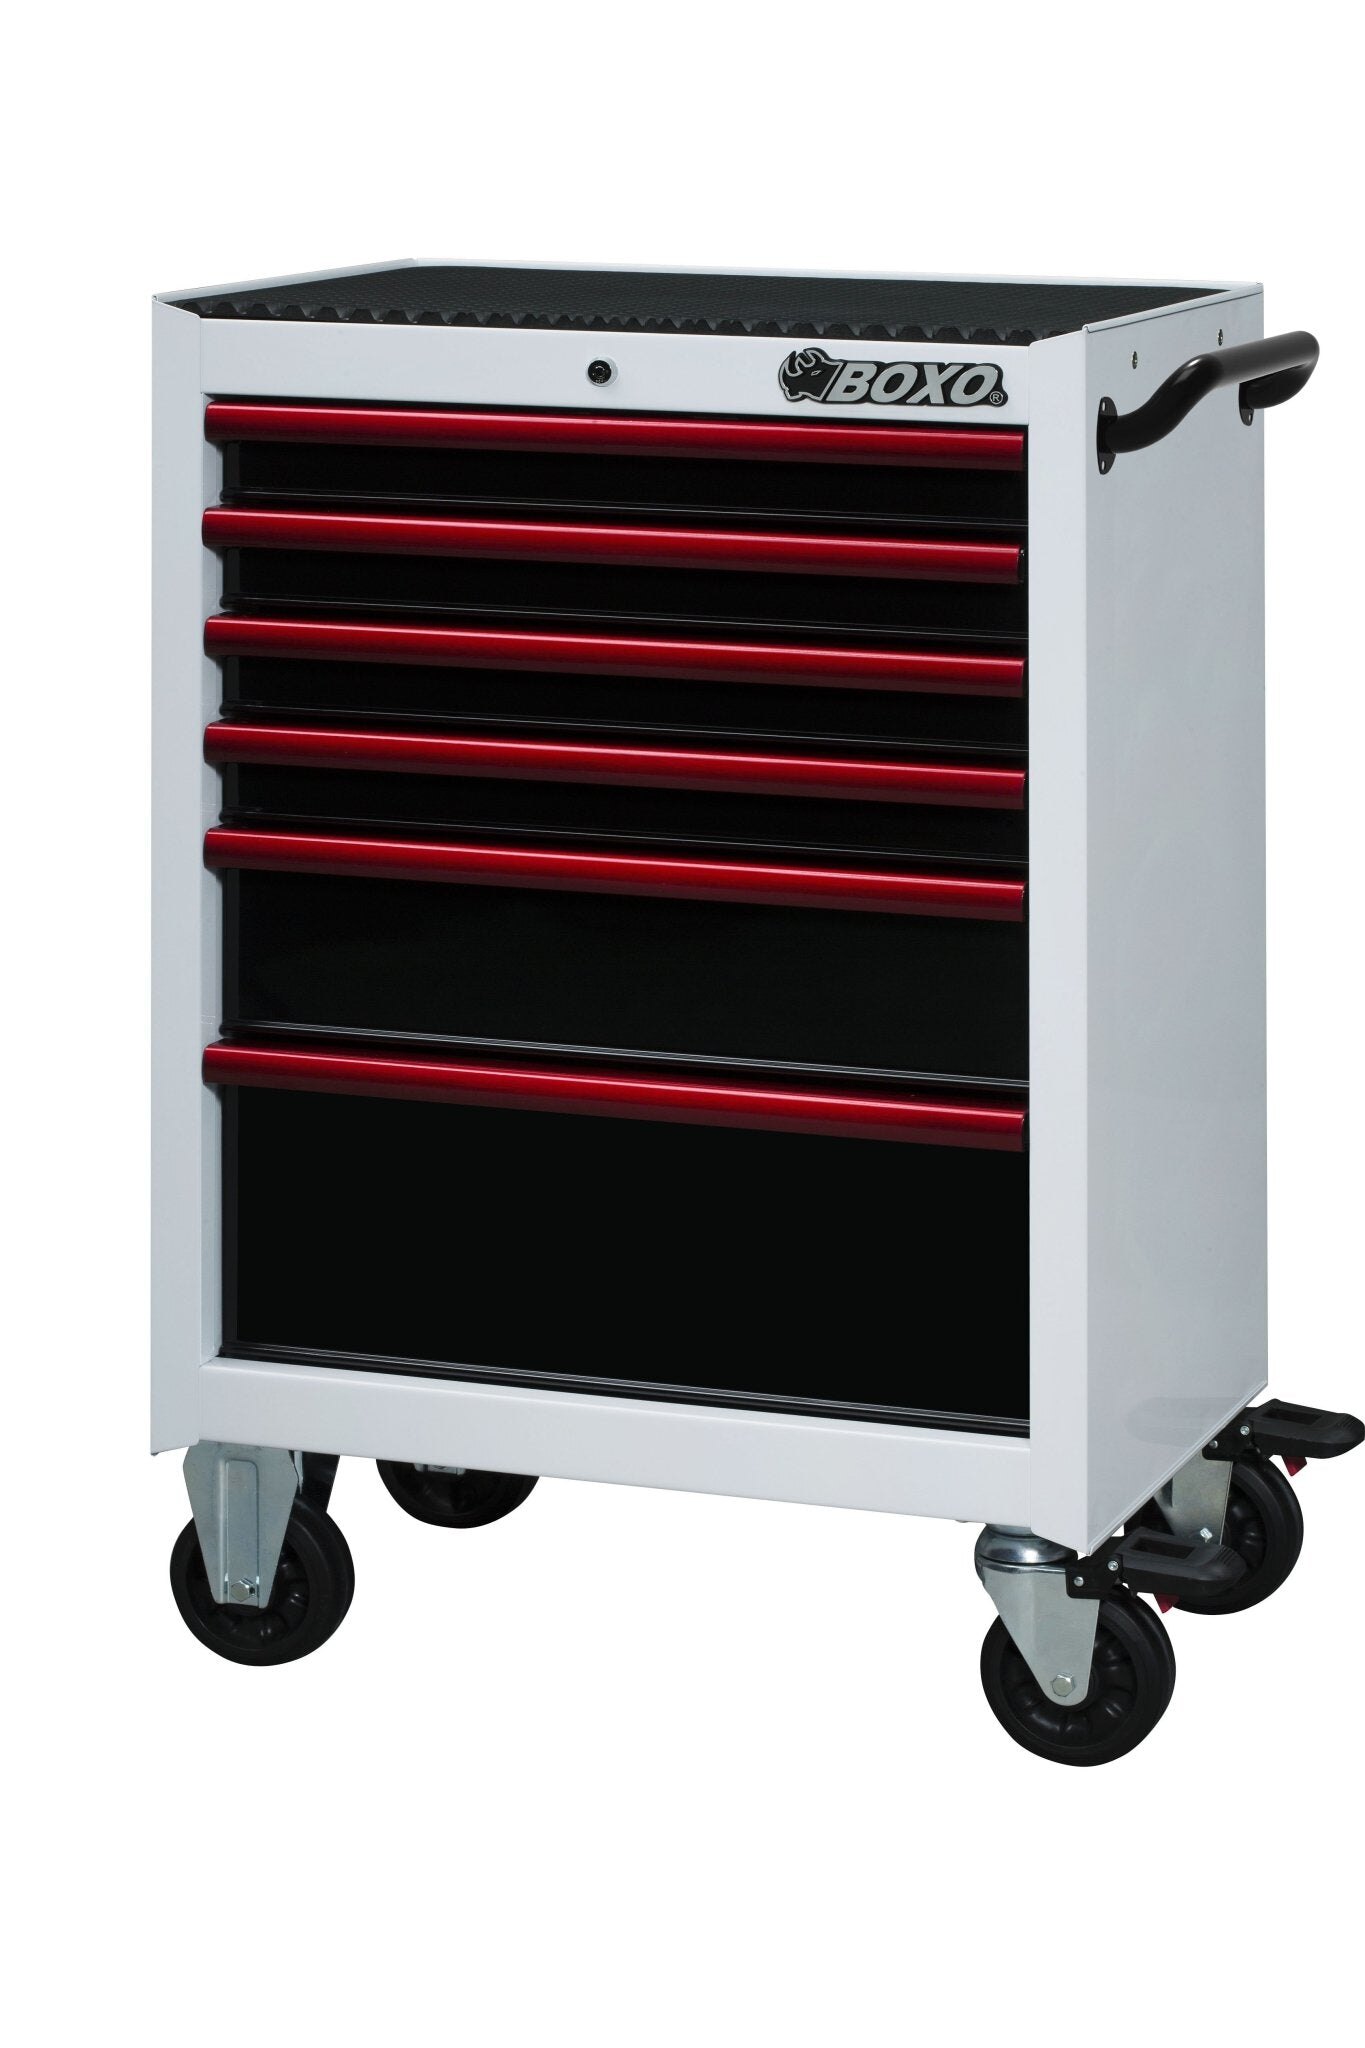 26" 6 Drawer Roll Cab (Gloss White Body/Gloss Black Drawers/ Red Anodized Drawer Pulls)